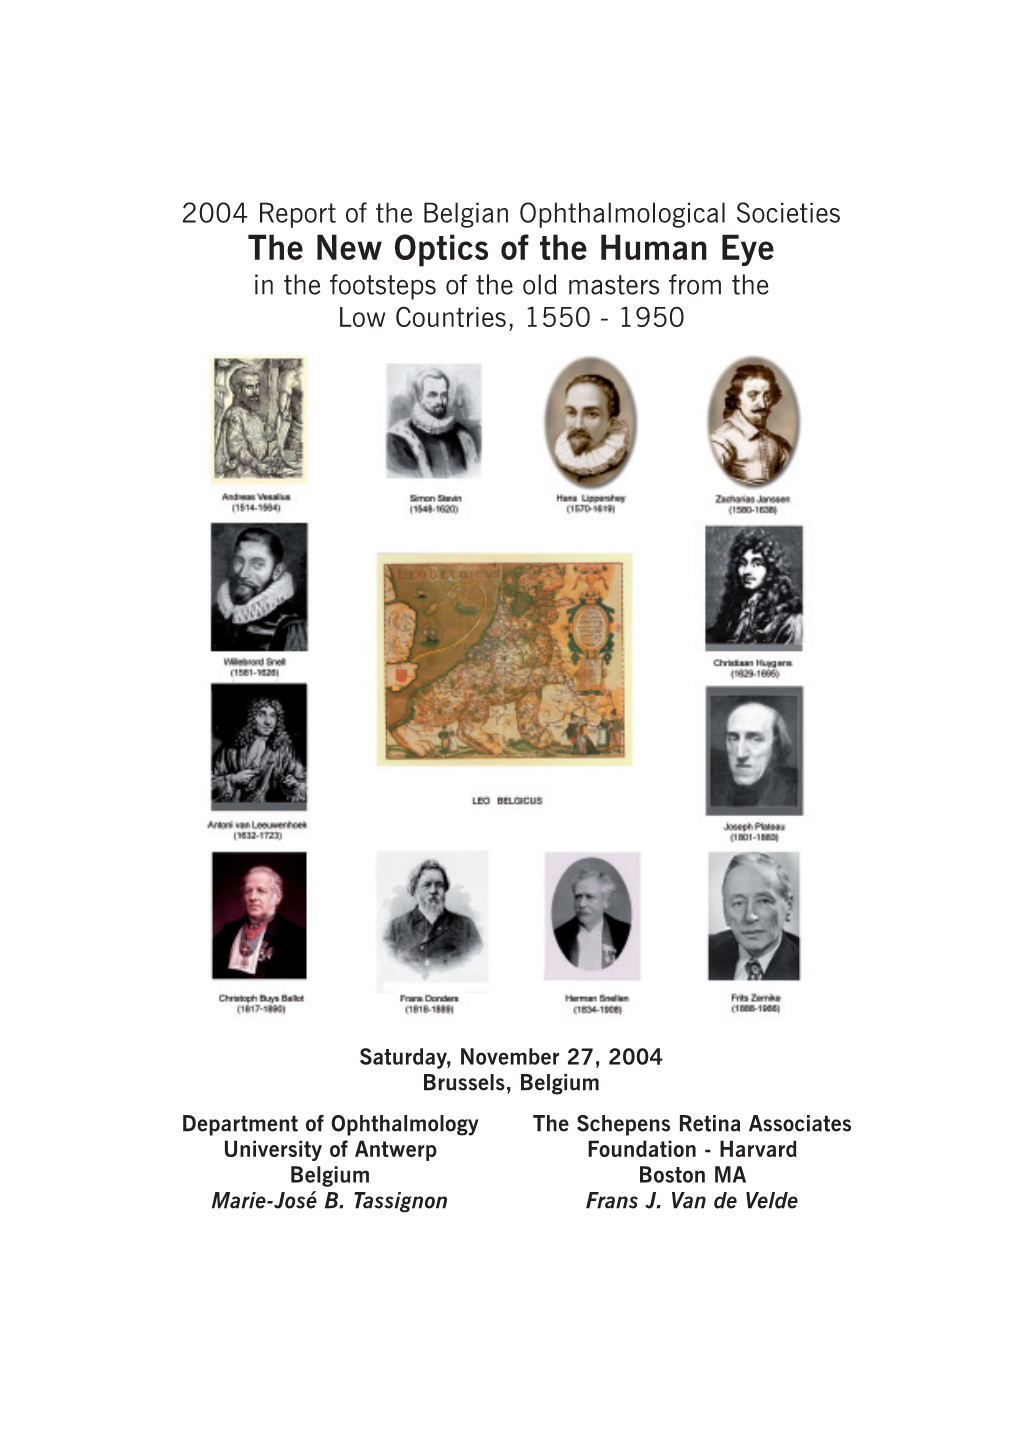 The New Optics of the Human Eye in the Footsteps of the Old Masters from the Low Countries, 1550 - 1950